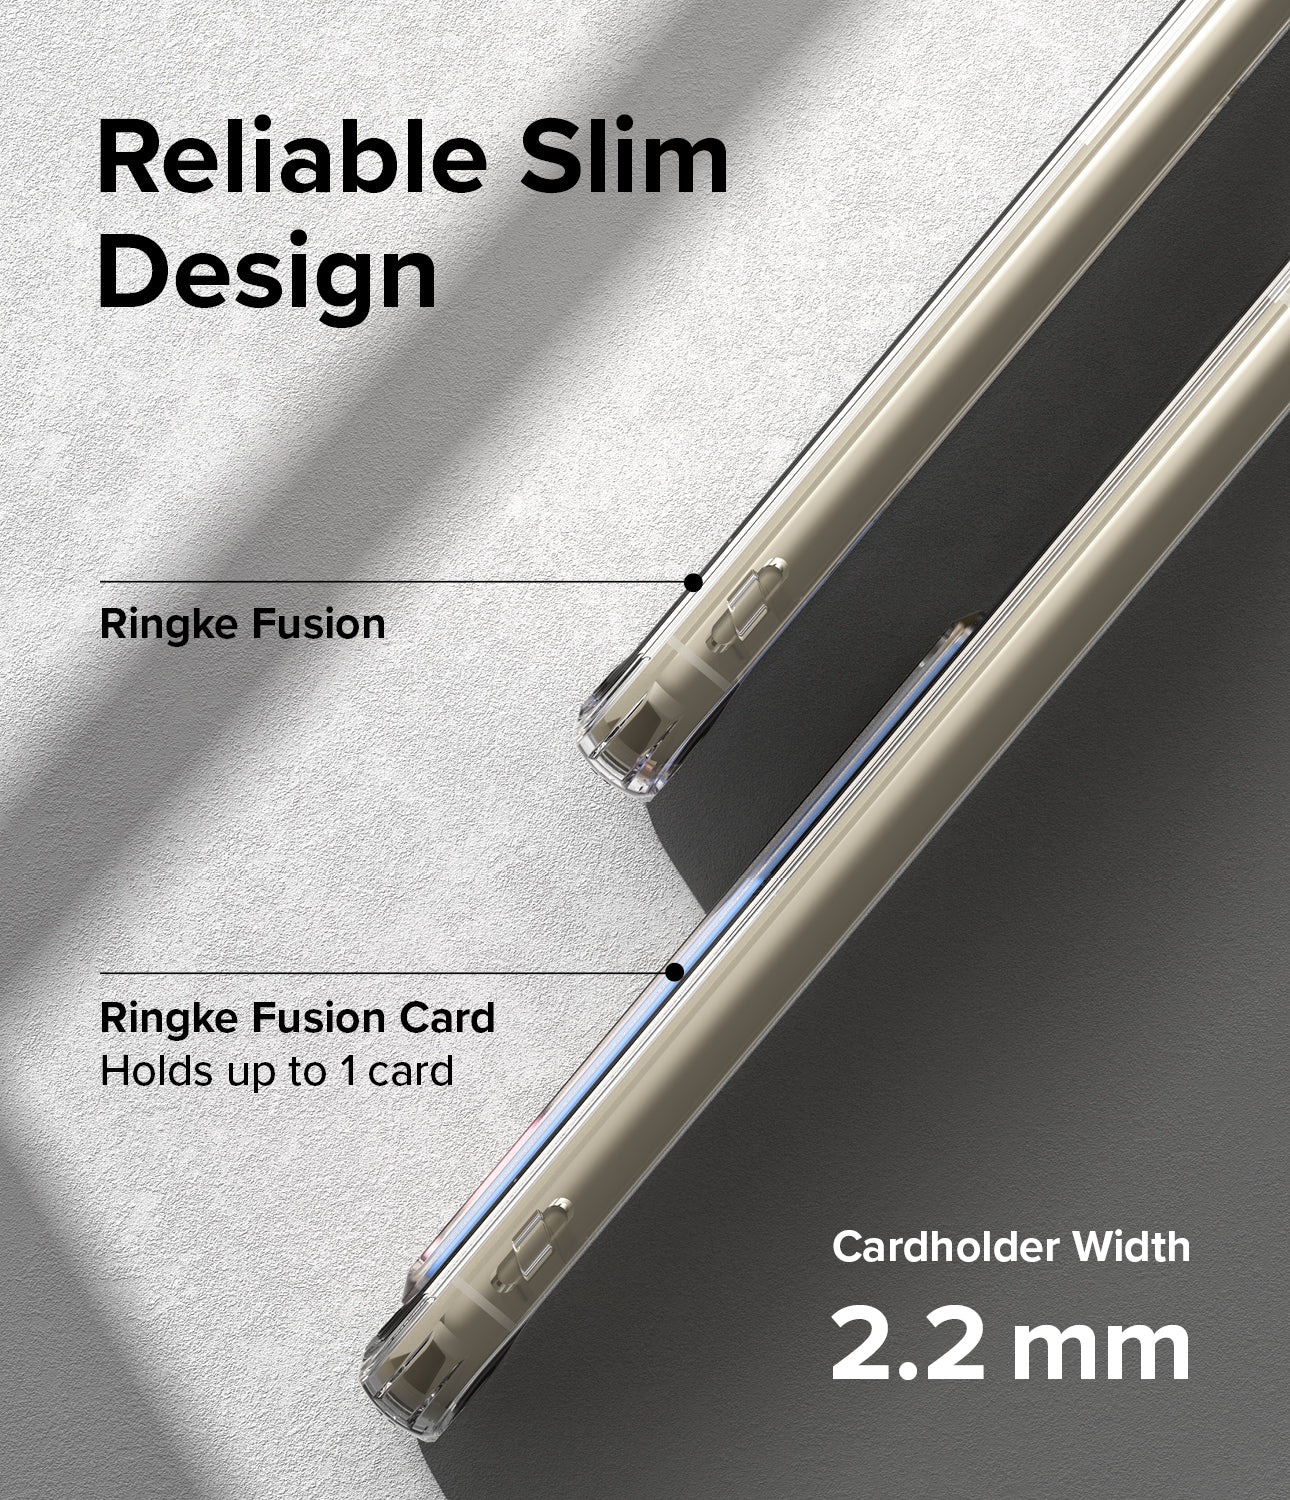 Reliable Slim Design l Ringke Fusion / Ringke Fusion Card - Holds up to 1 card / Cardholder Width 2.2 mm